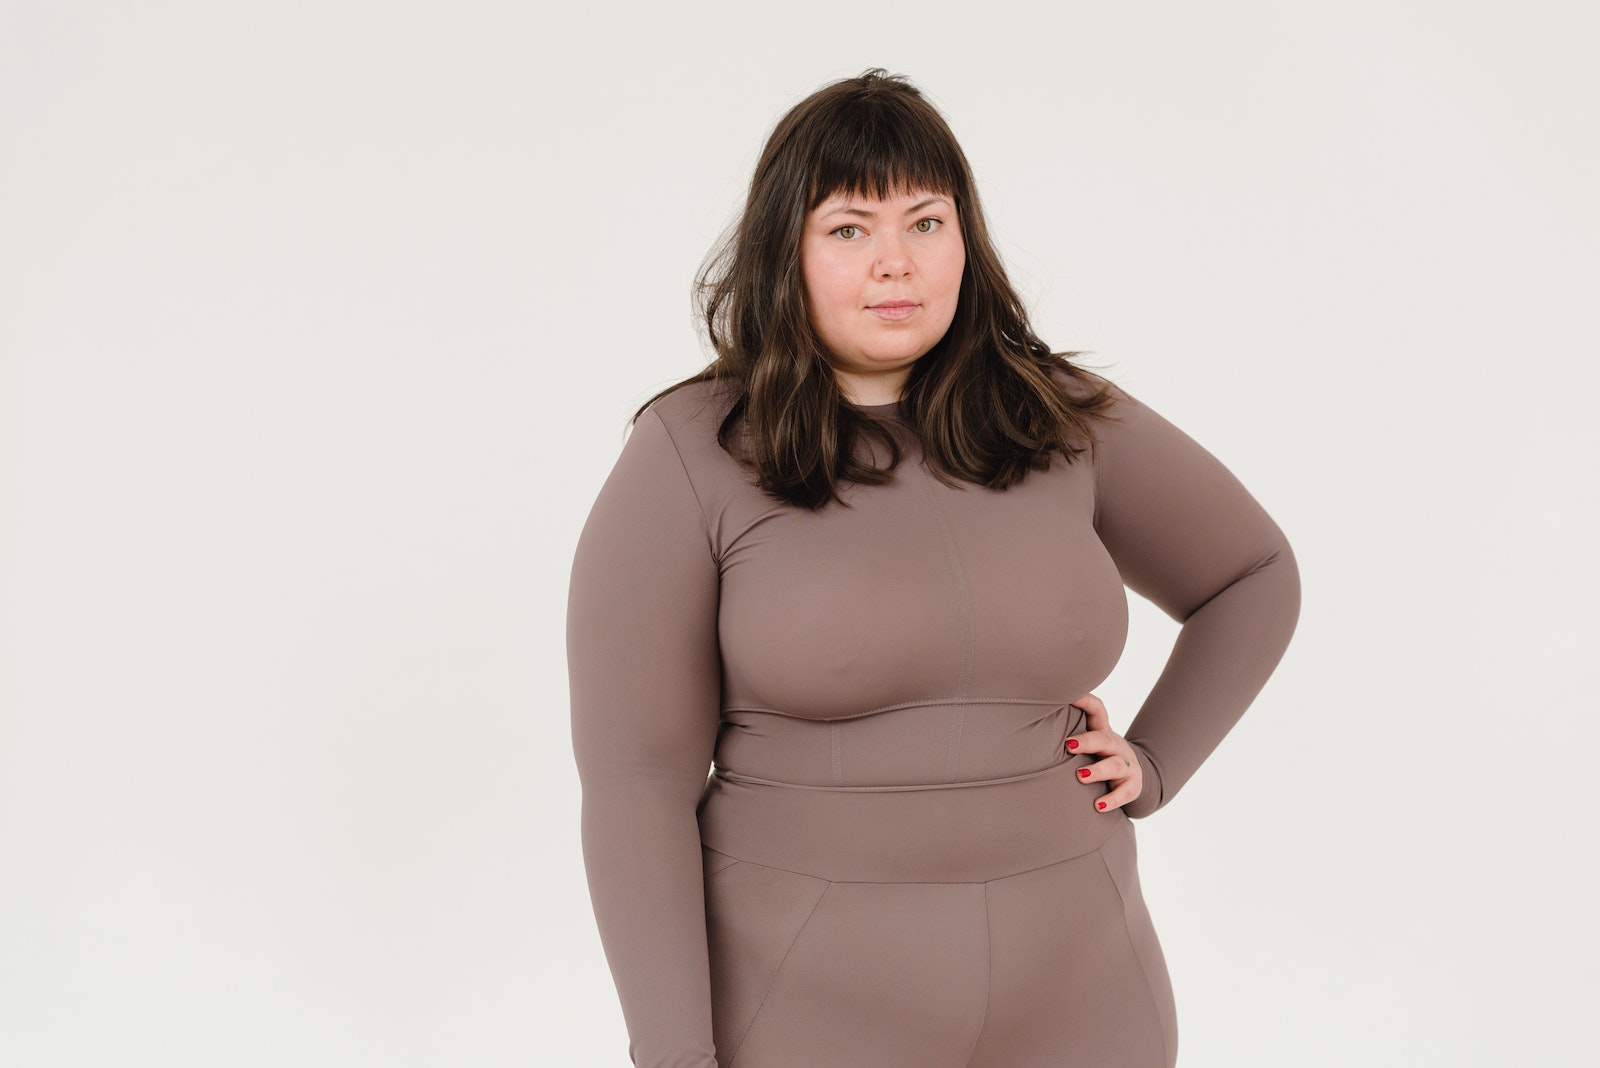 Plus size female in activewear keeping hand on waist and looking at camera against white background